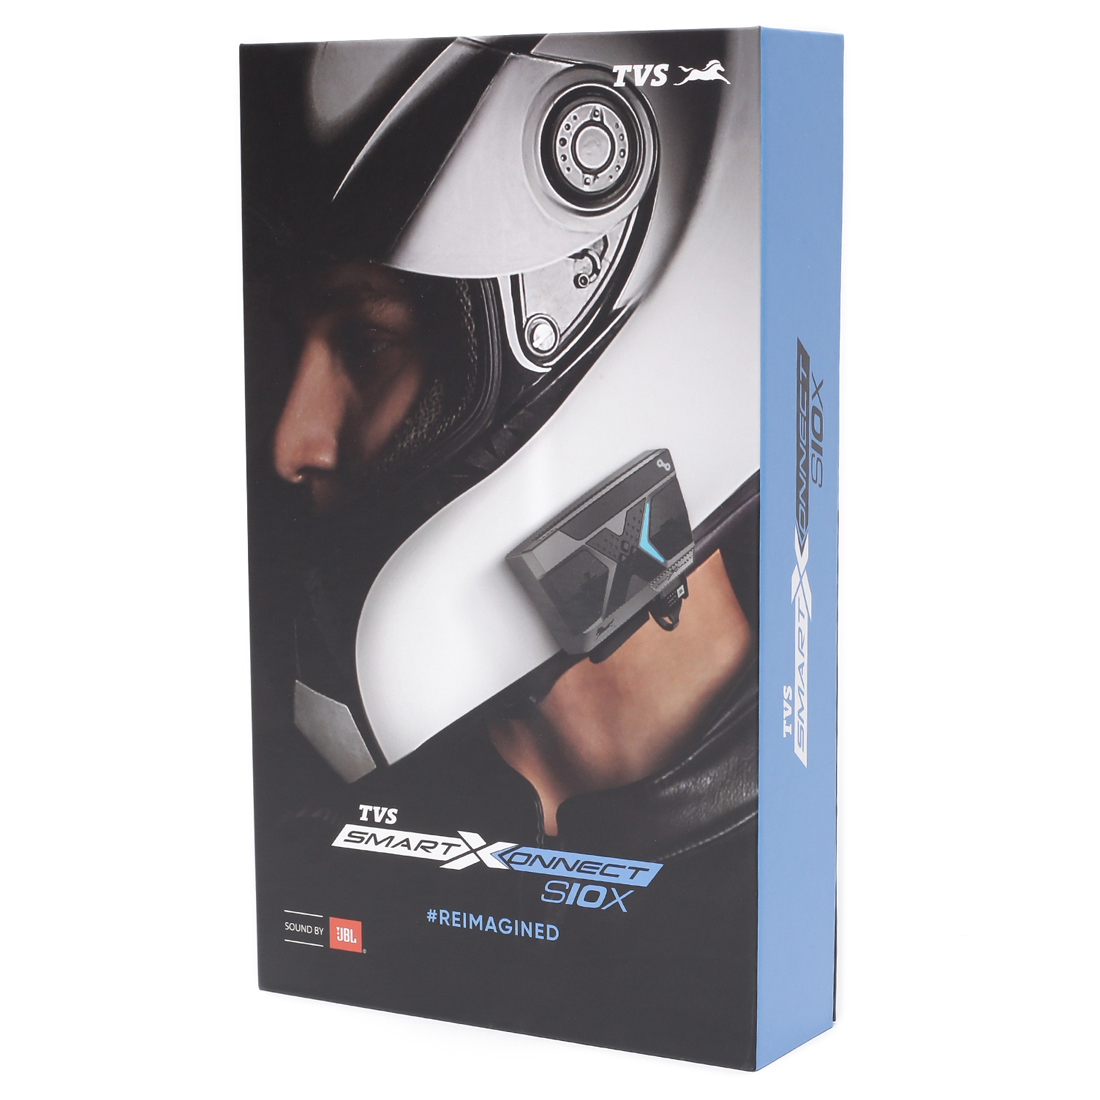  TVS Racing SmartXonnect S20X : Premium Helmet Bluetooth Device with Intercom connecting 20 Devices, JBL HD Sound, & 1.2 Km Range- Waterproof with 16 Hours Battery